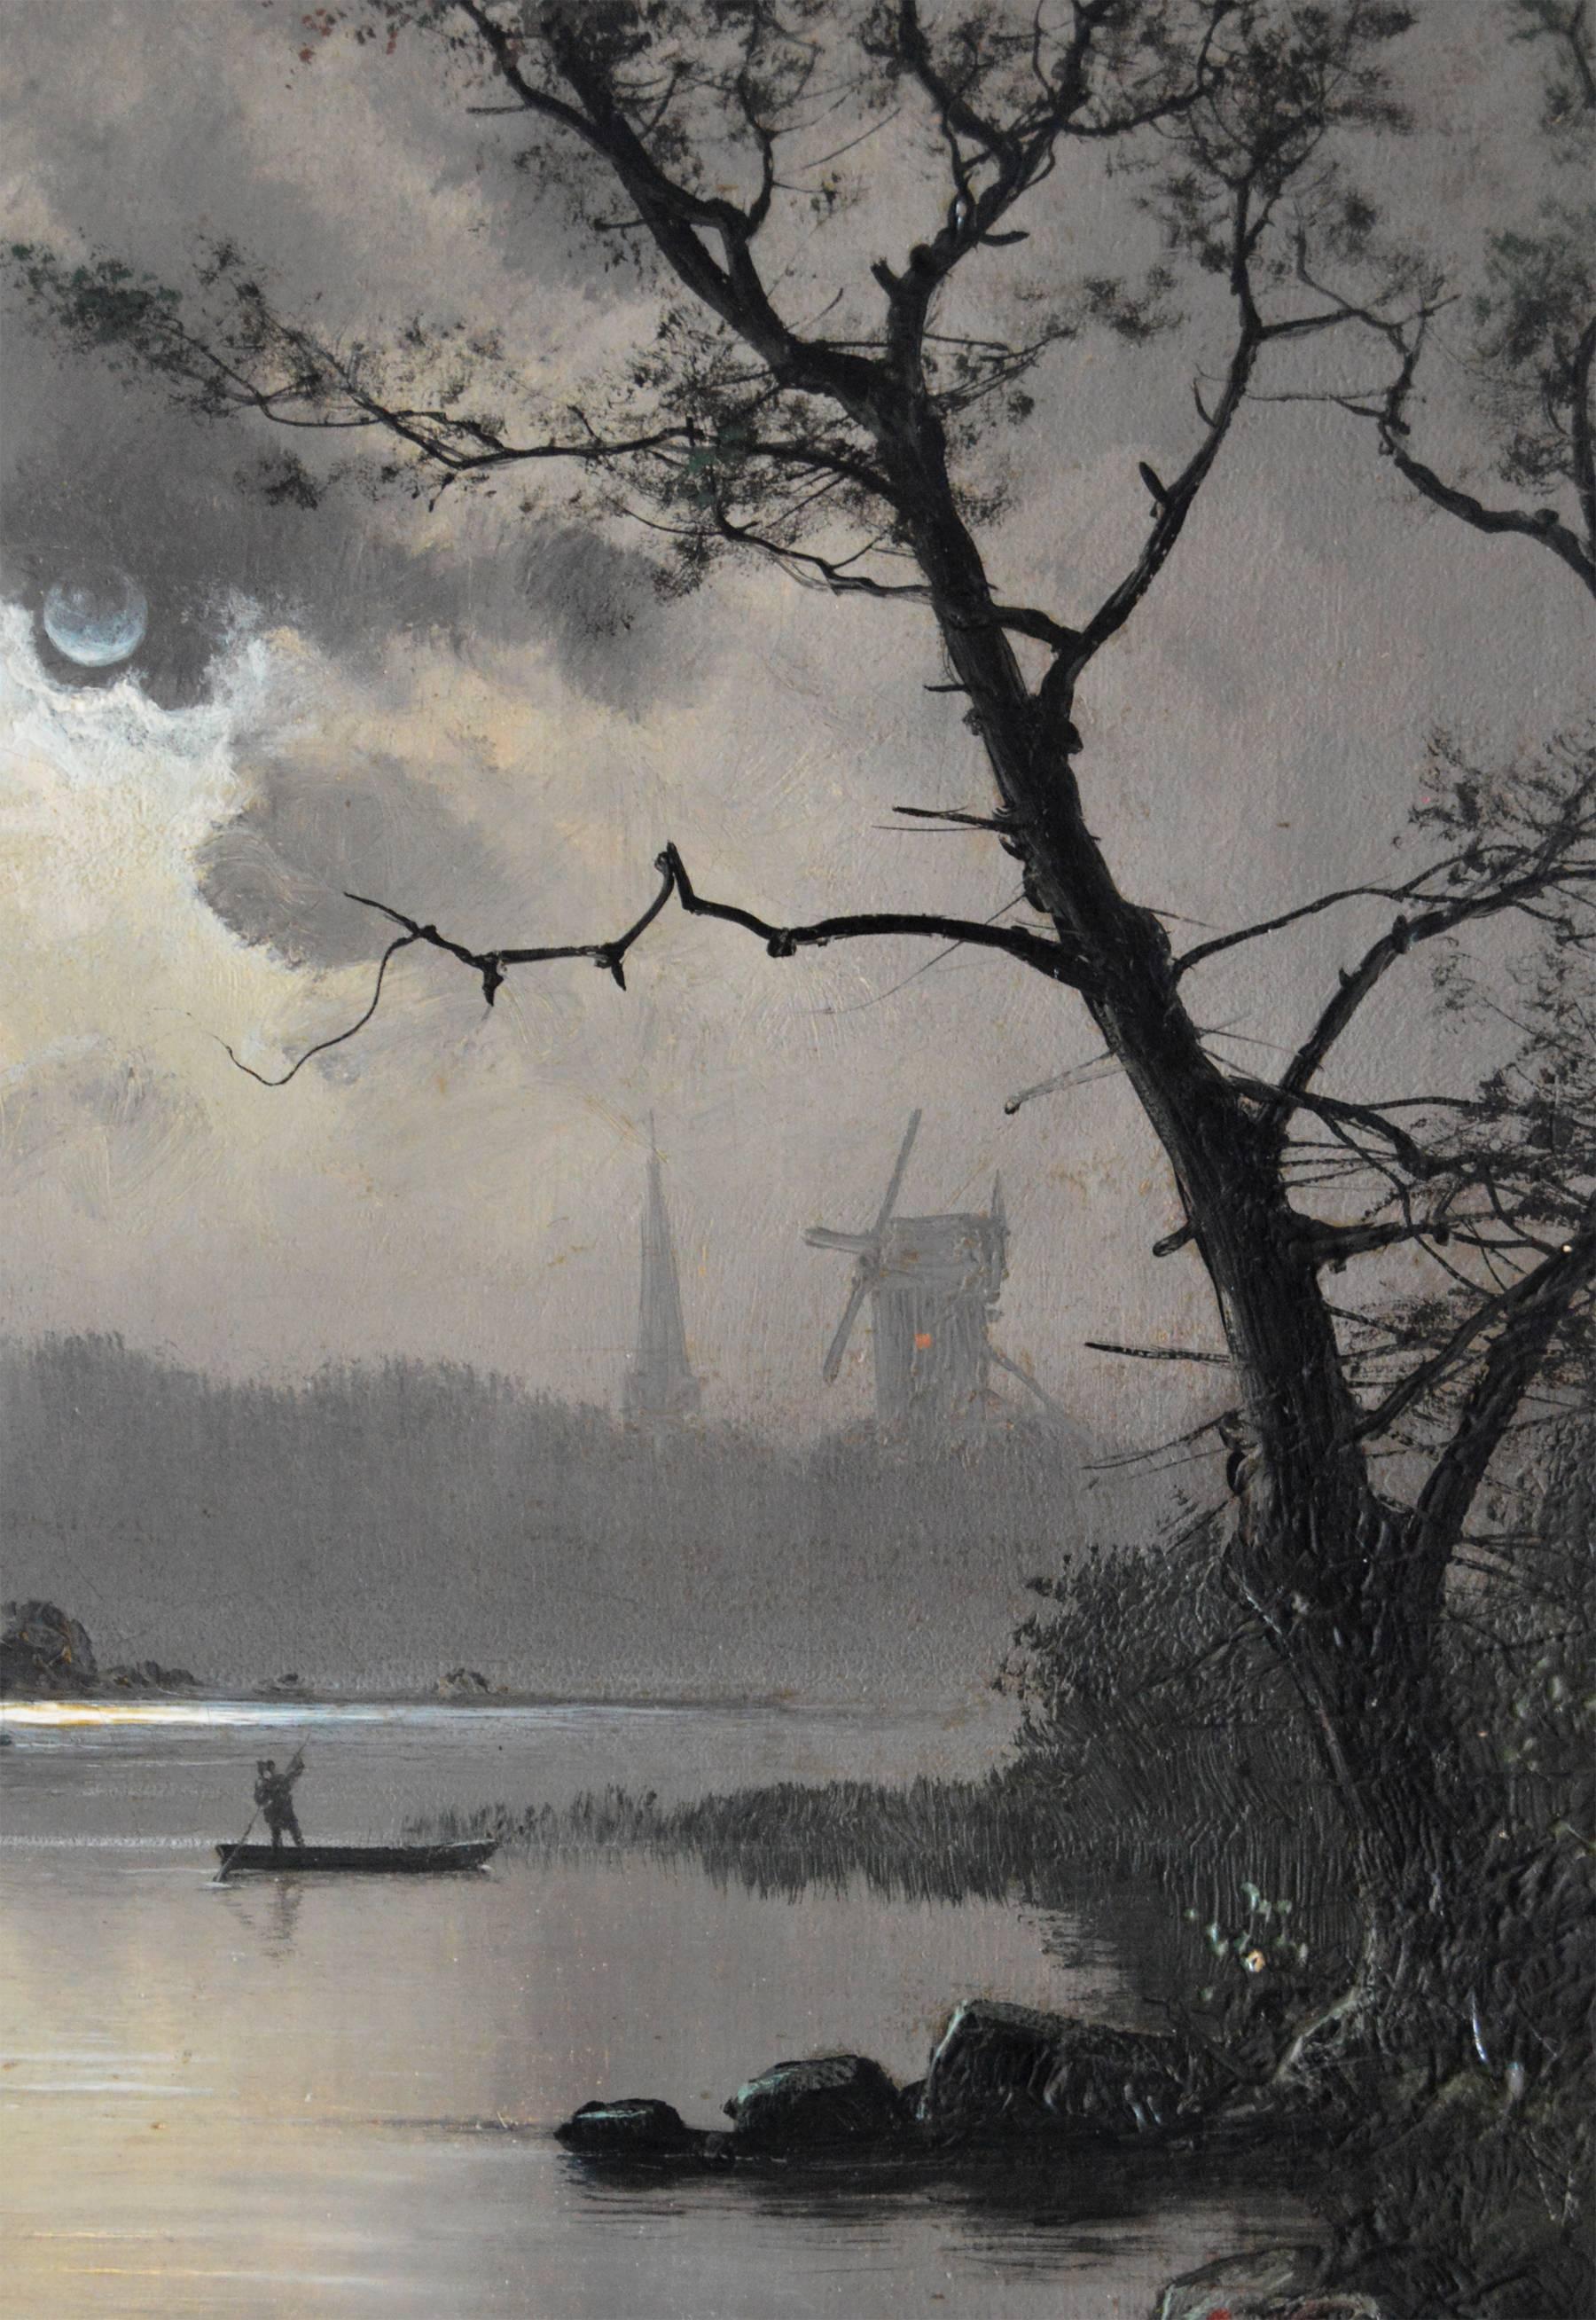 Nils H Christiansen 
Danish, (1850 -1922)
Fishing by Moonlight
Oil on canvas, signed
Image size: 17¾ inches x 13¾ inches 
Size including frame: 22¼ inches x 18¼ inches

Nils Hans Christiansen was a well-accomplished painter born in Esbjerg in